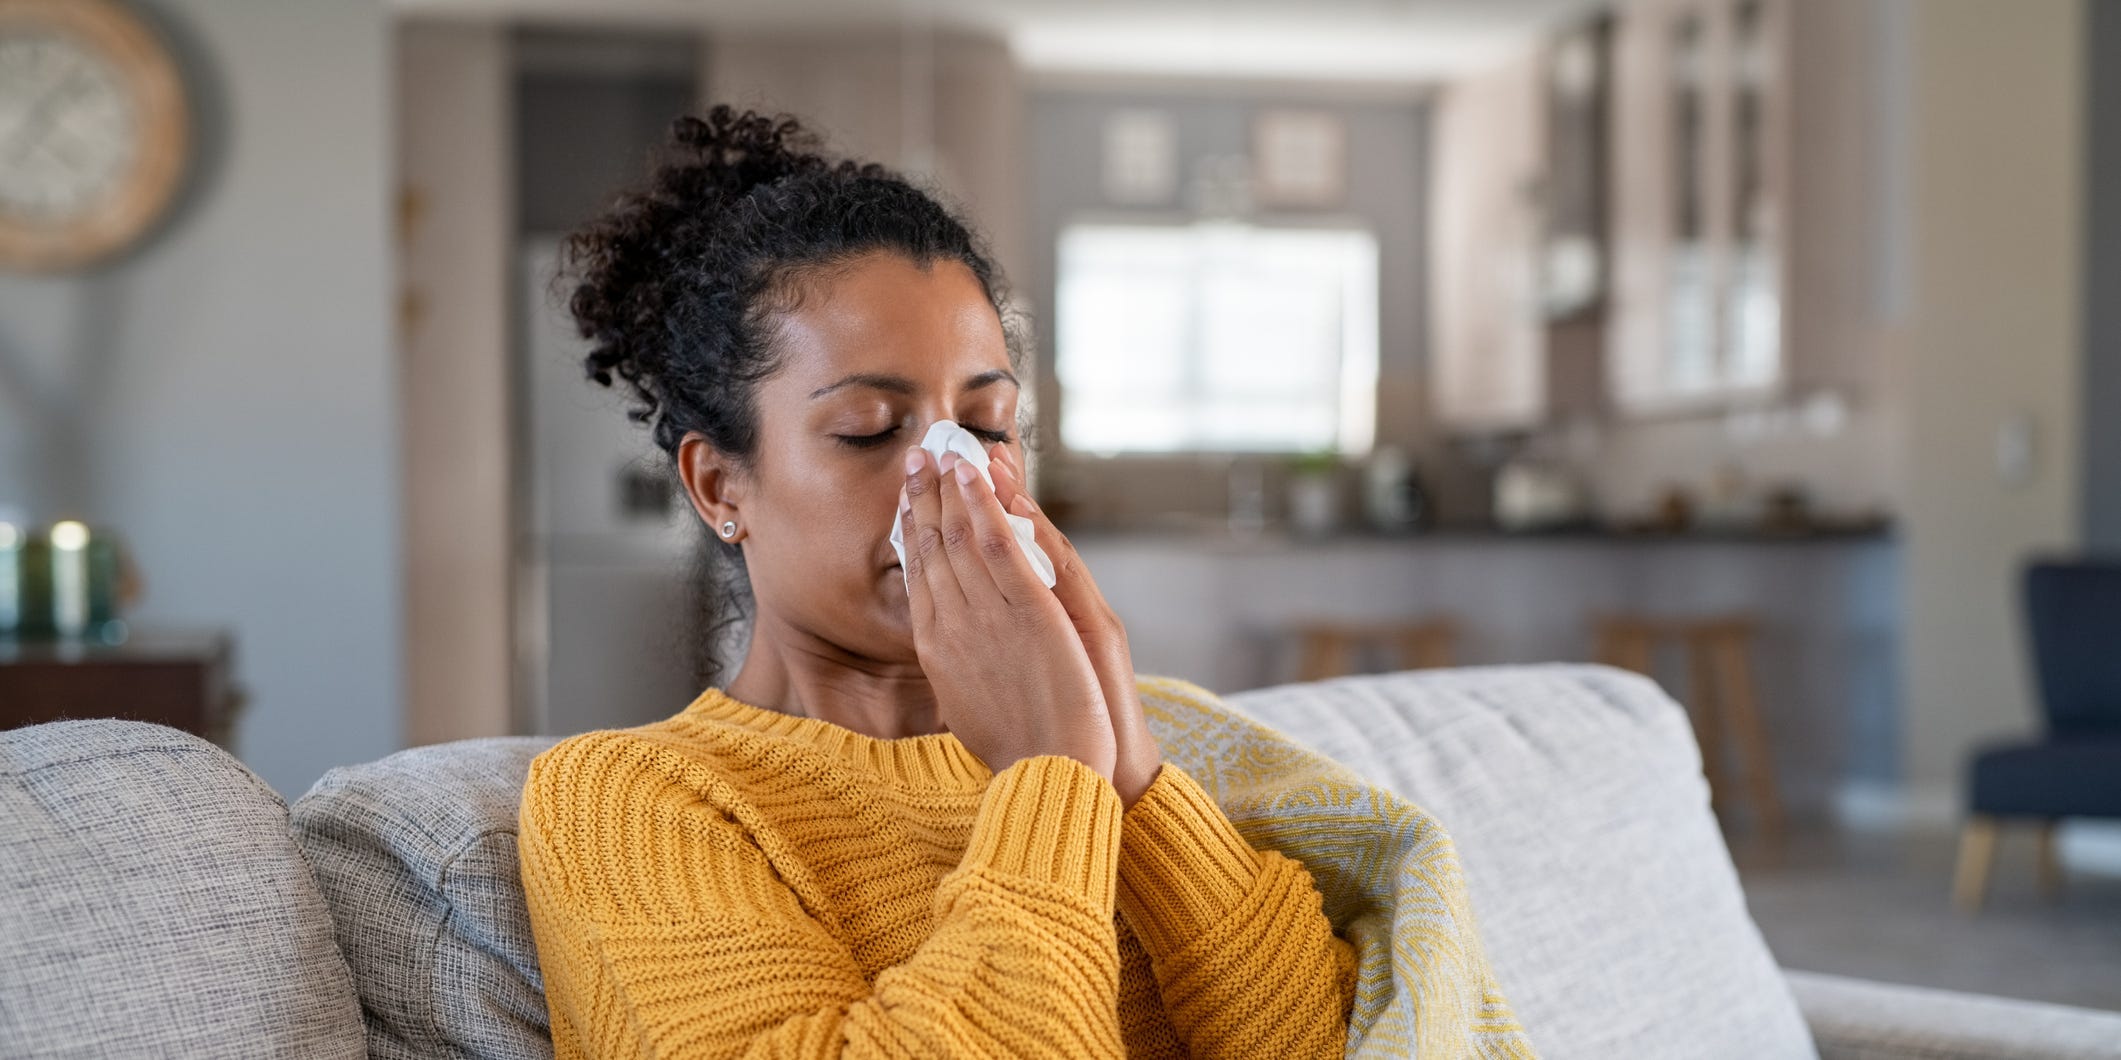 A Black woman in a yellow sweater sits on the couch wrapped in a blanket with a tissue to her nose.